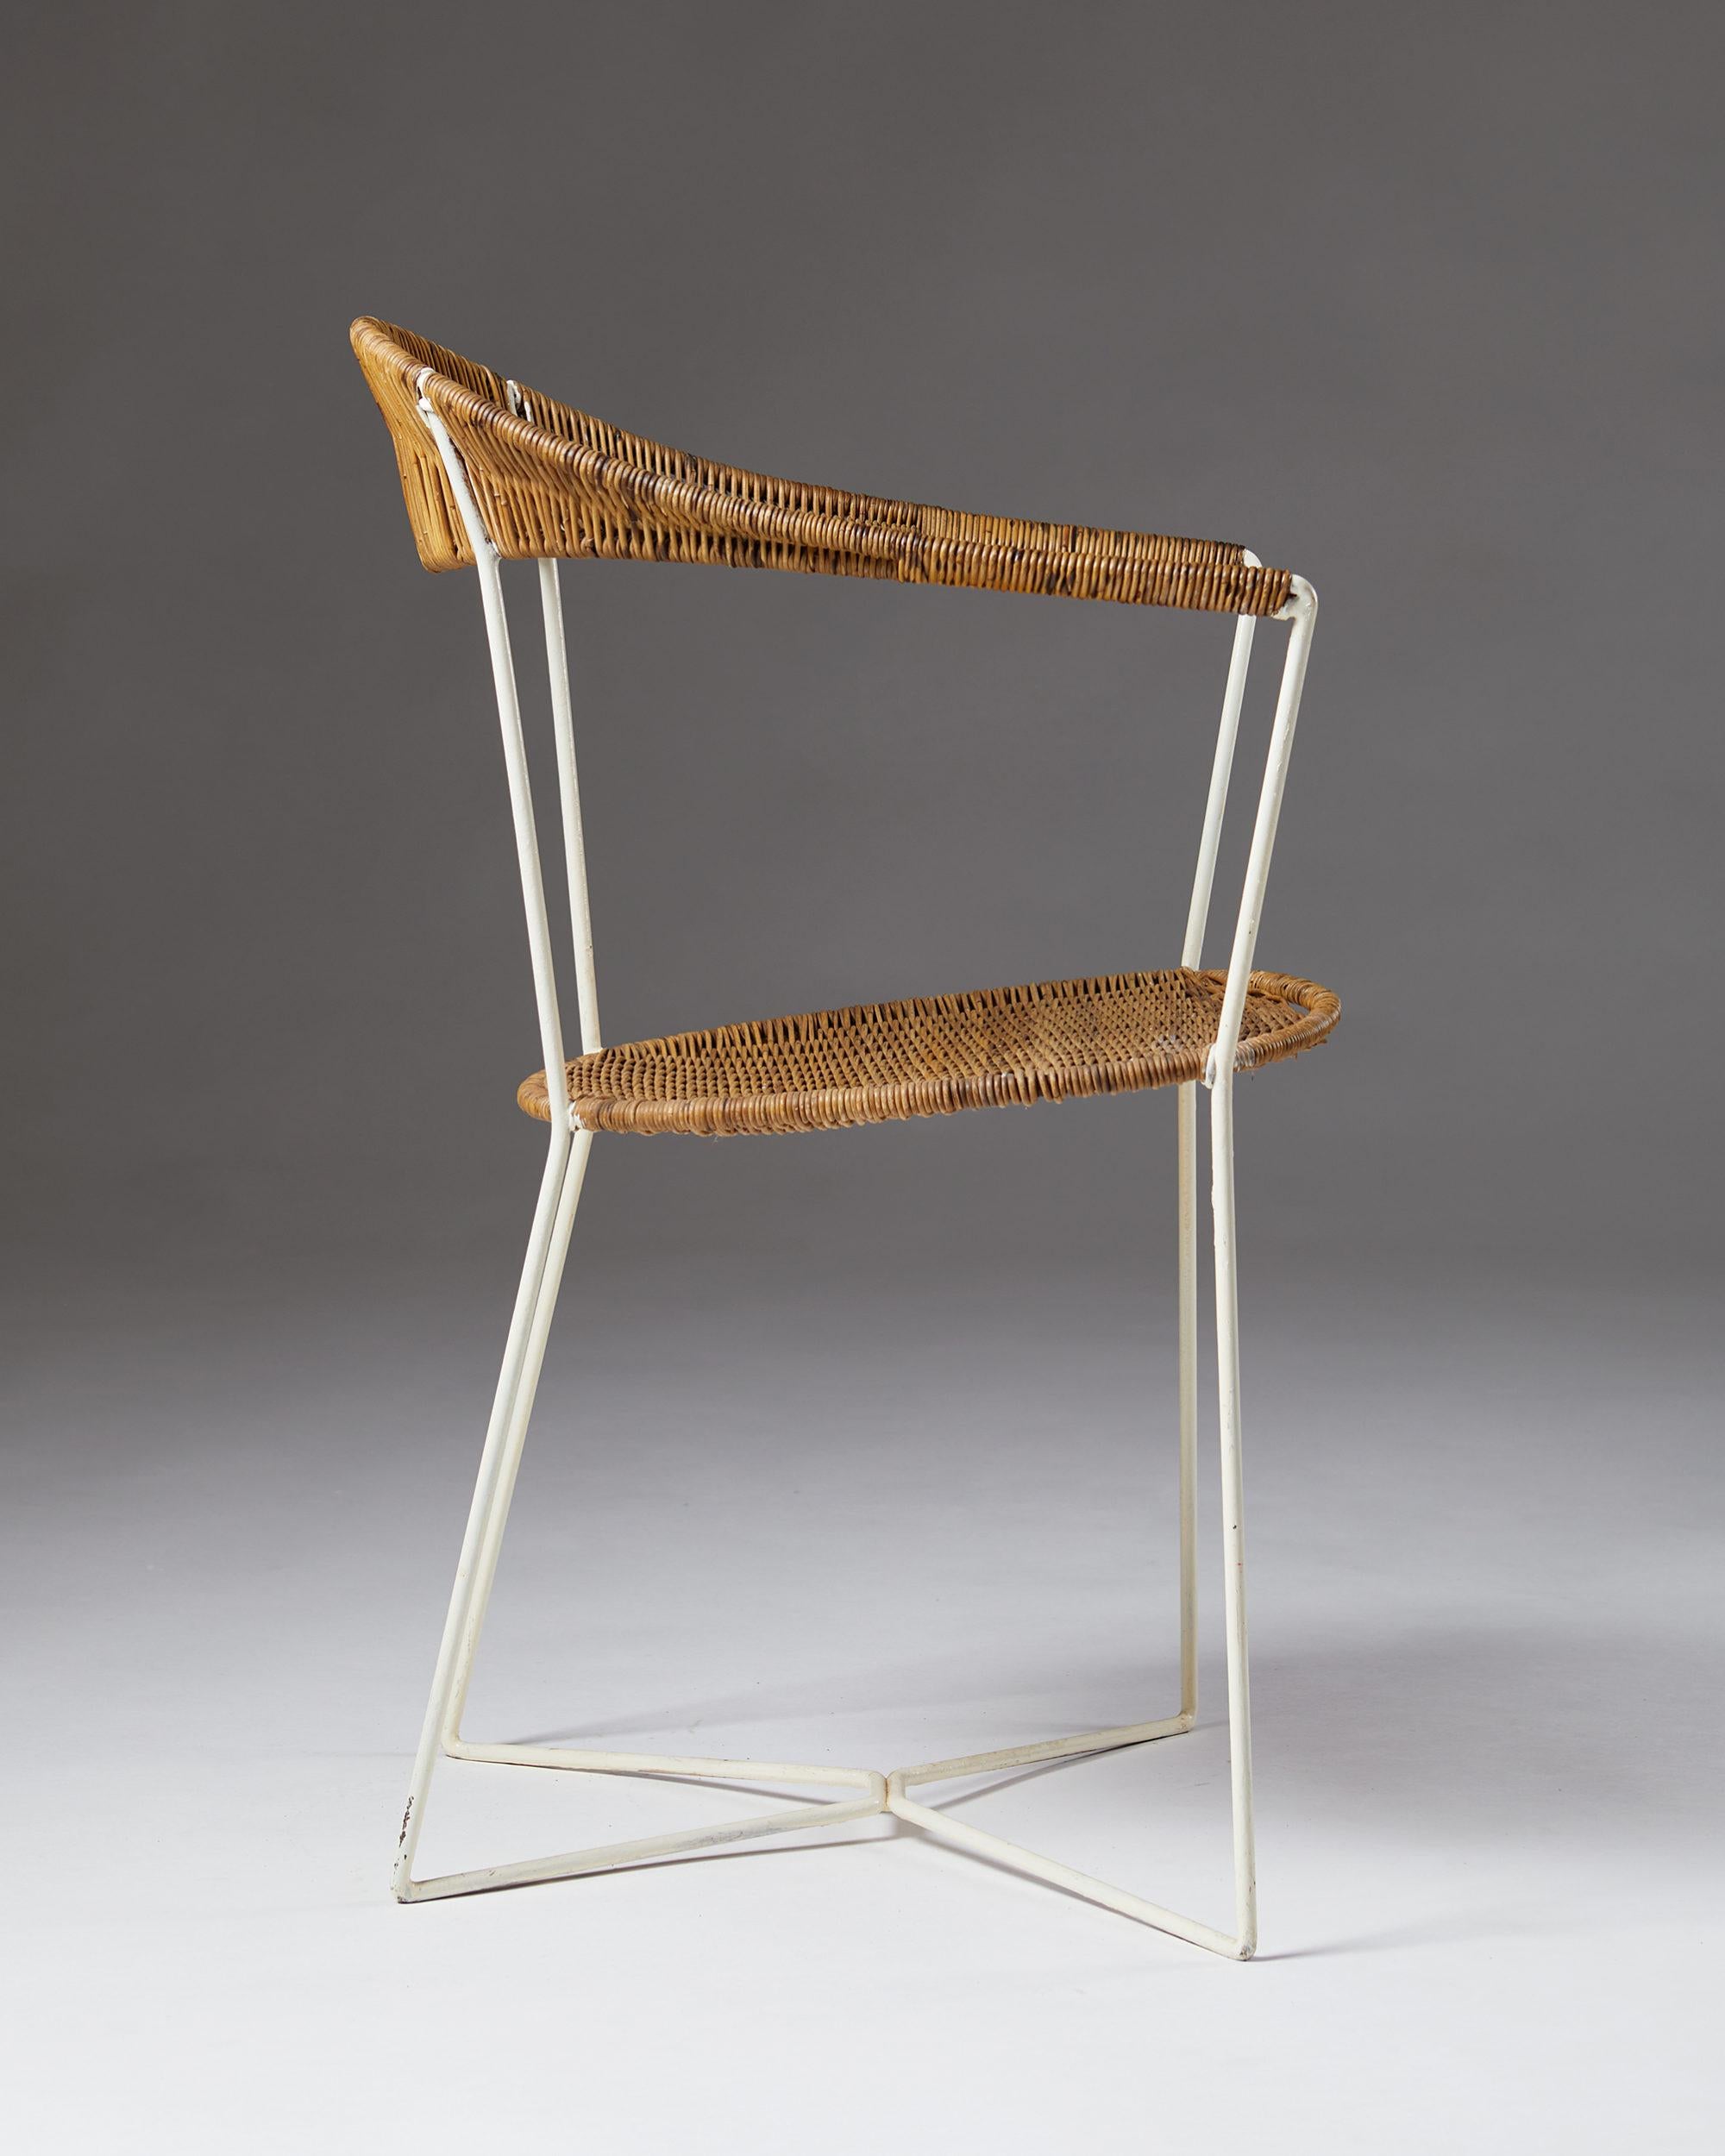 Armchair designed by Ivar Callmander
Sweden, 1920s.
Lacquered steel and cane.

Measures: H 82 cm / 2' 8 1/4